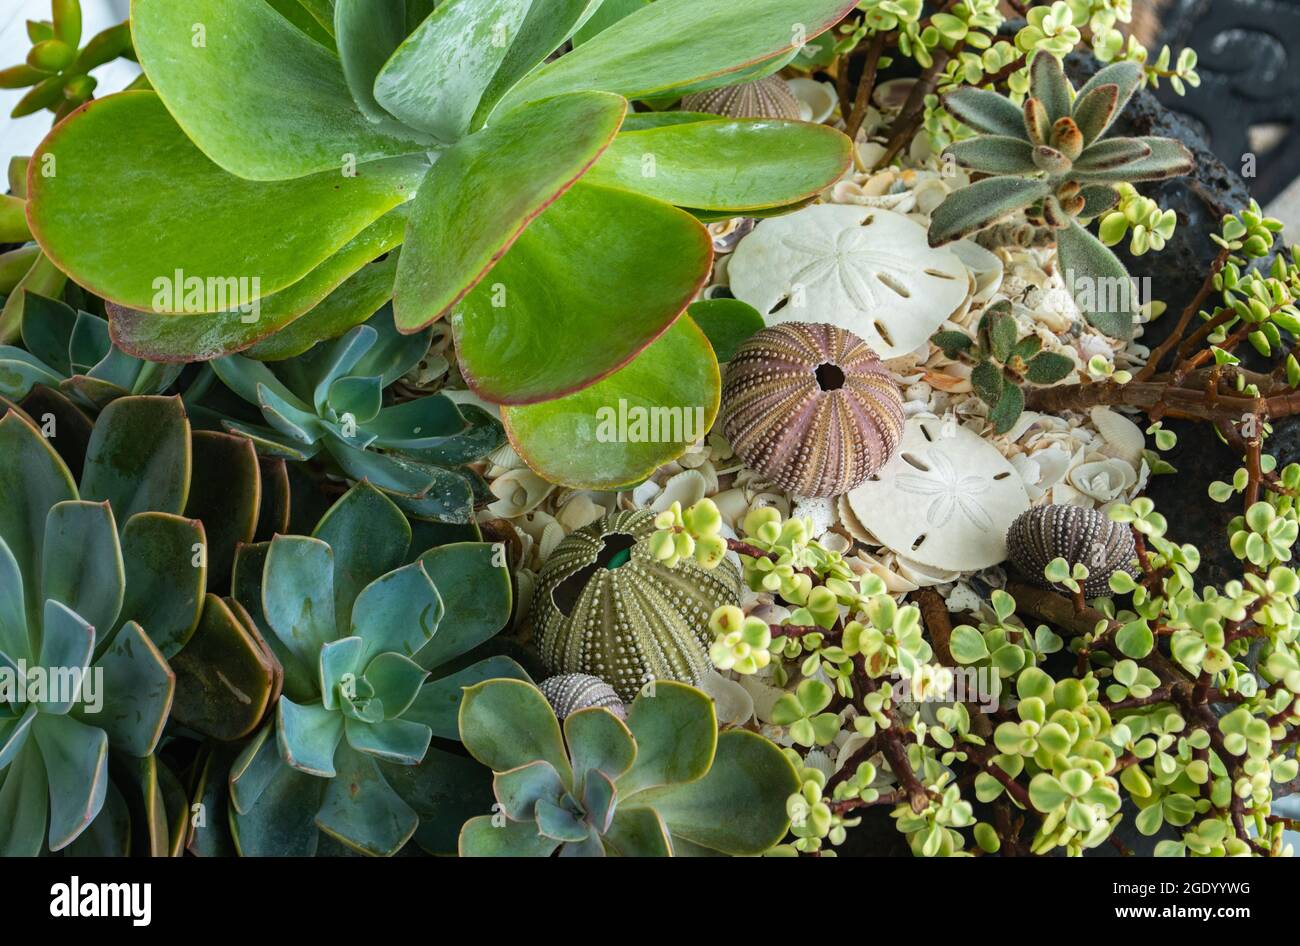 Closeup of tropical plants and succulents with sand dollars and seashells garden Stock Photo